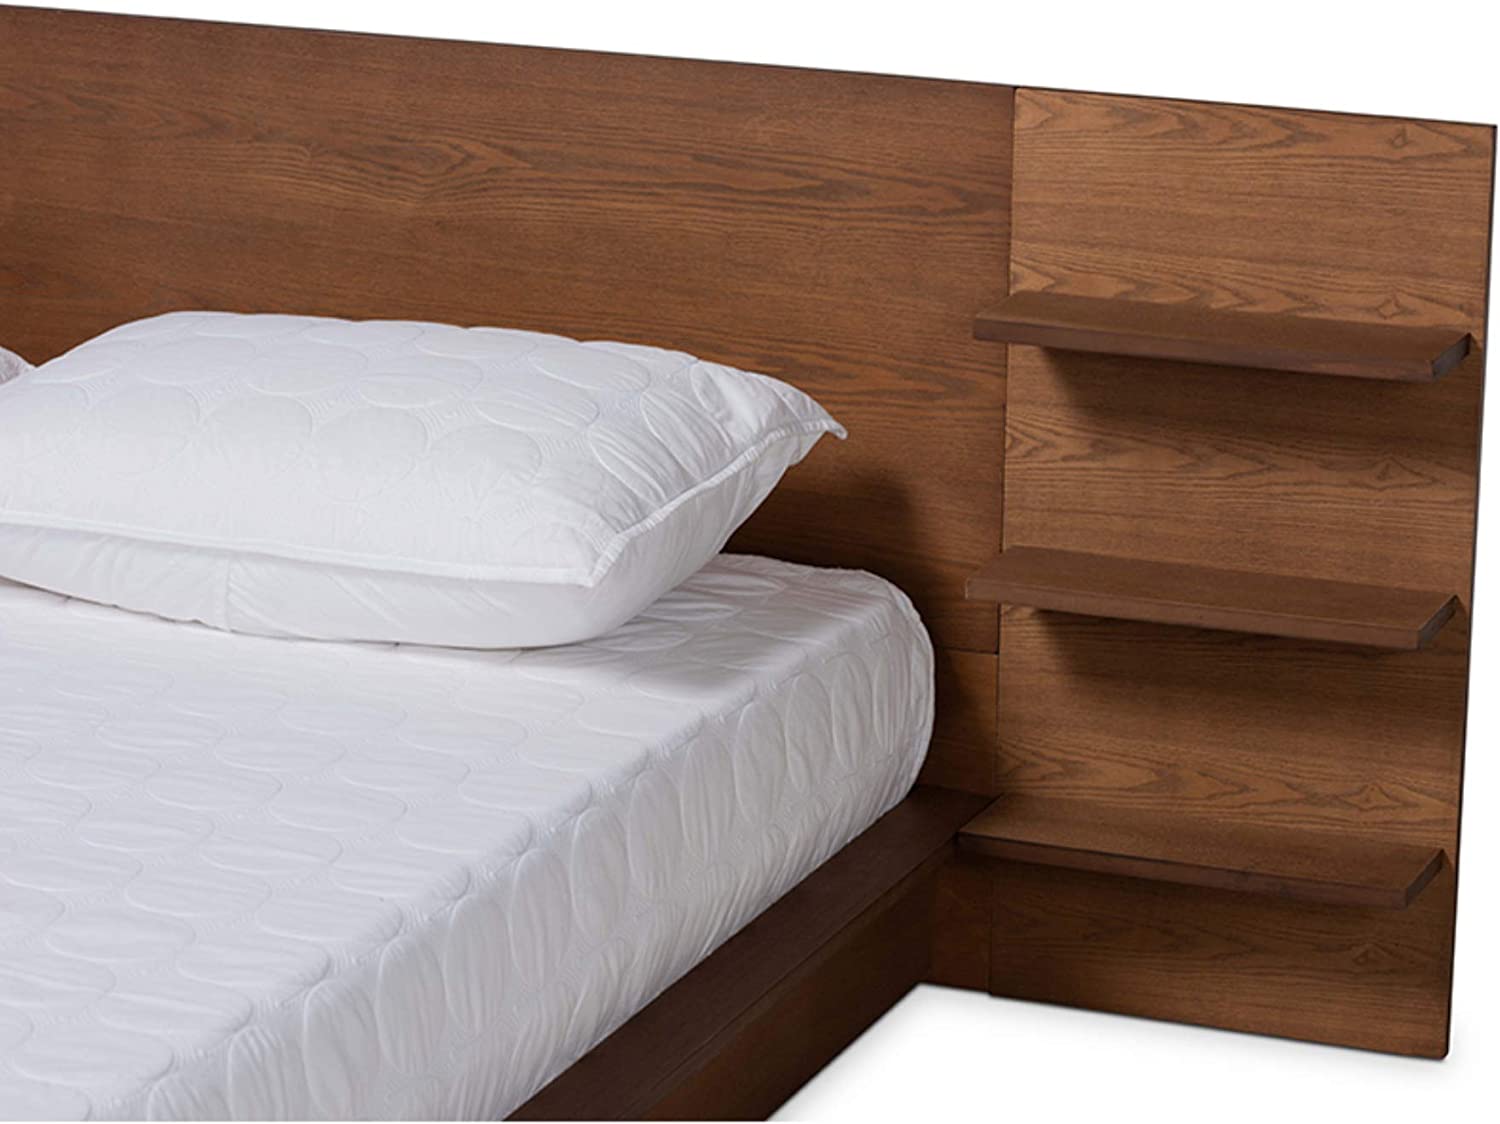 Baxton Studio Elina Modern and Contemporary Walnut Brown Finished Wood Queen Size Platform Storage Bed with Shelves